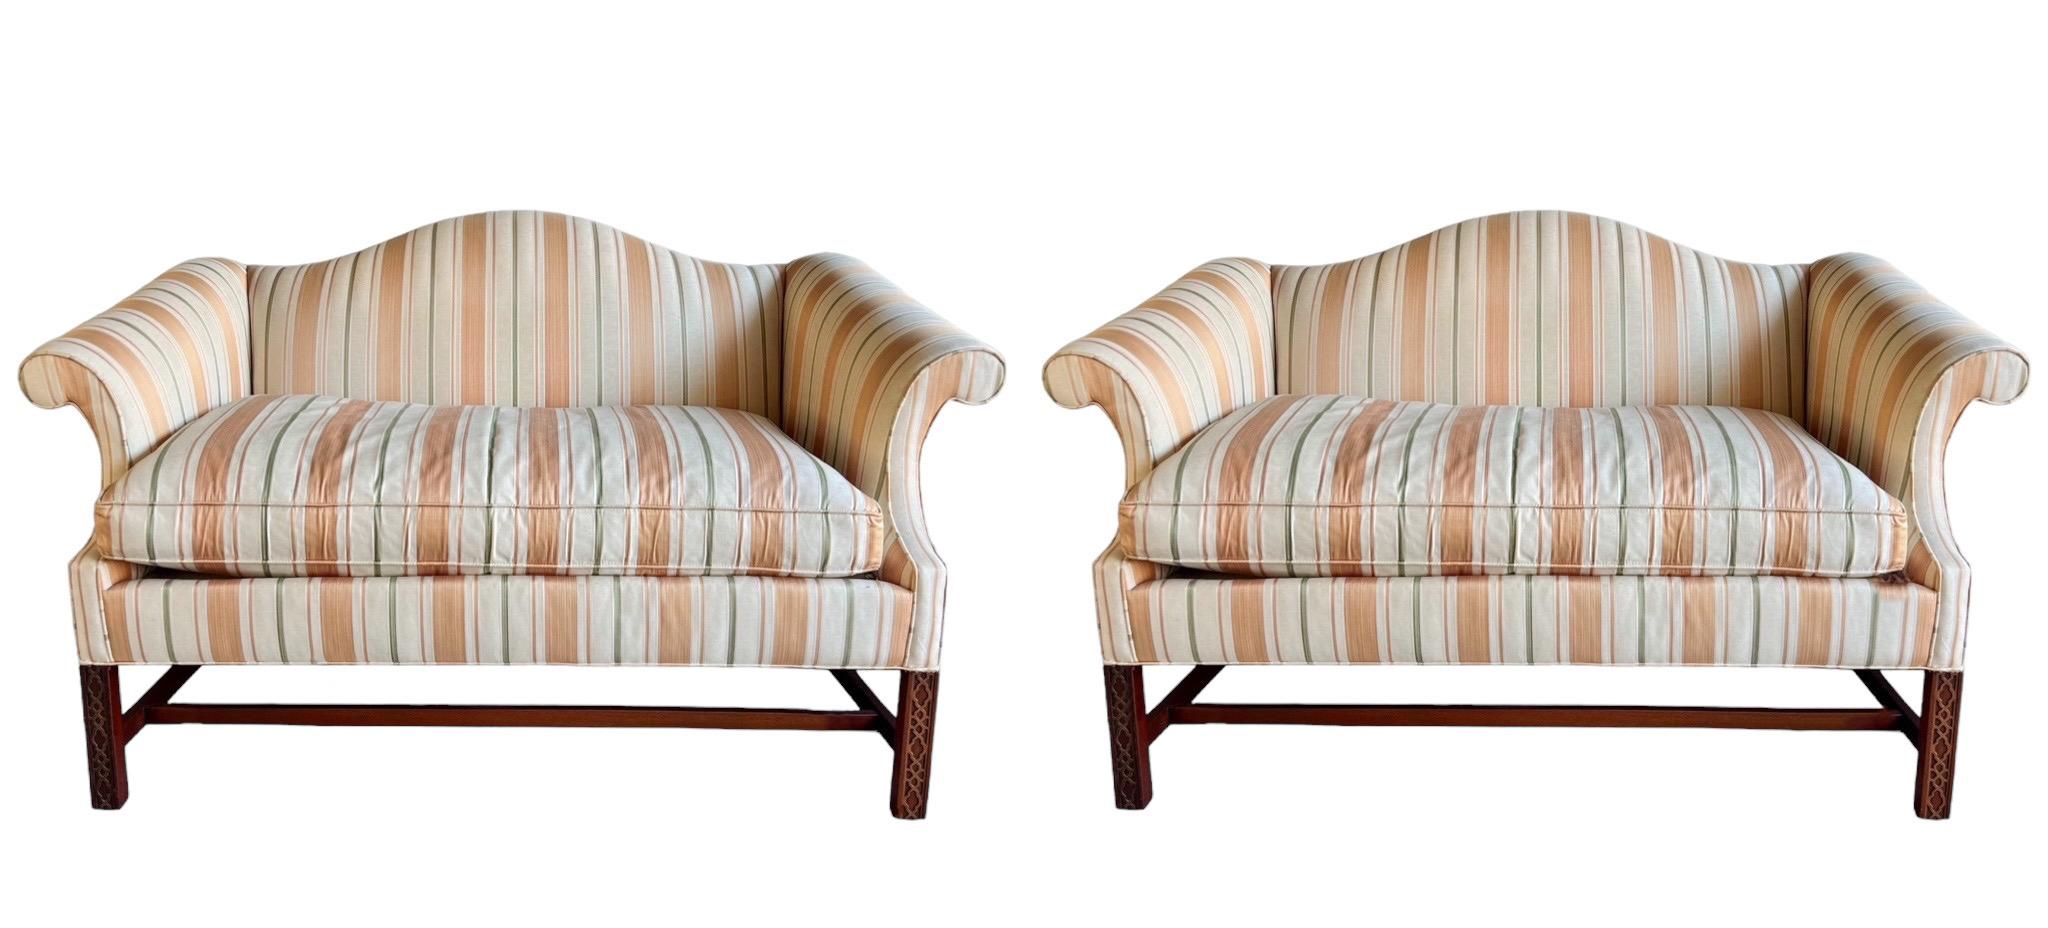 Upholstery Chinese Chippendale Style Settees / Sofas W/ Mahogany Frame By Southwood - Pair